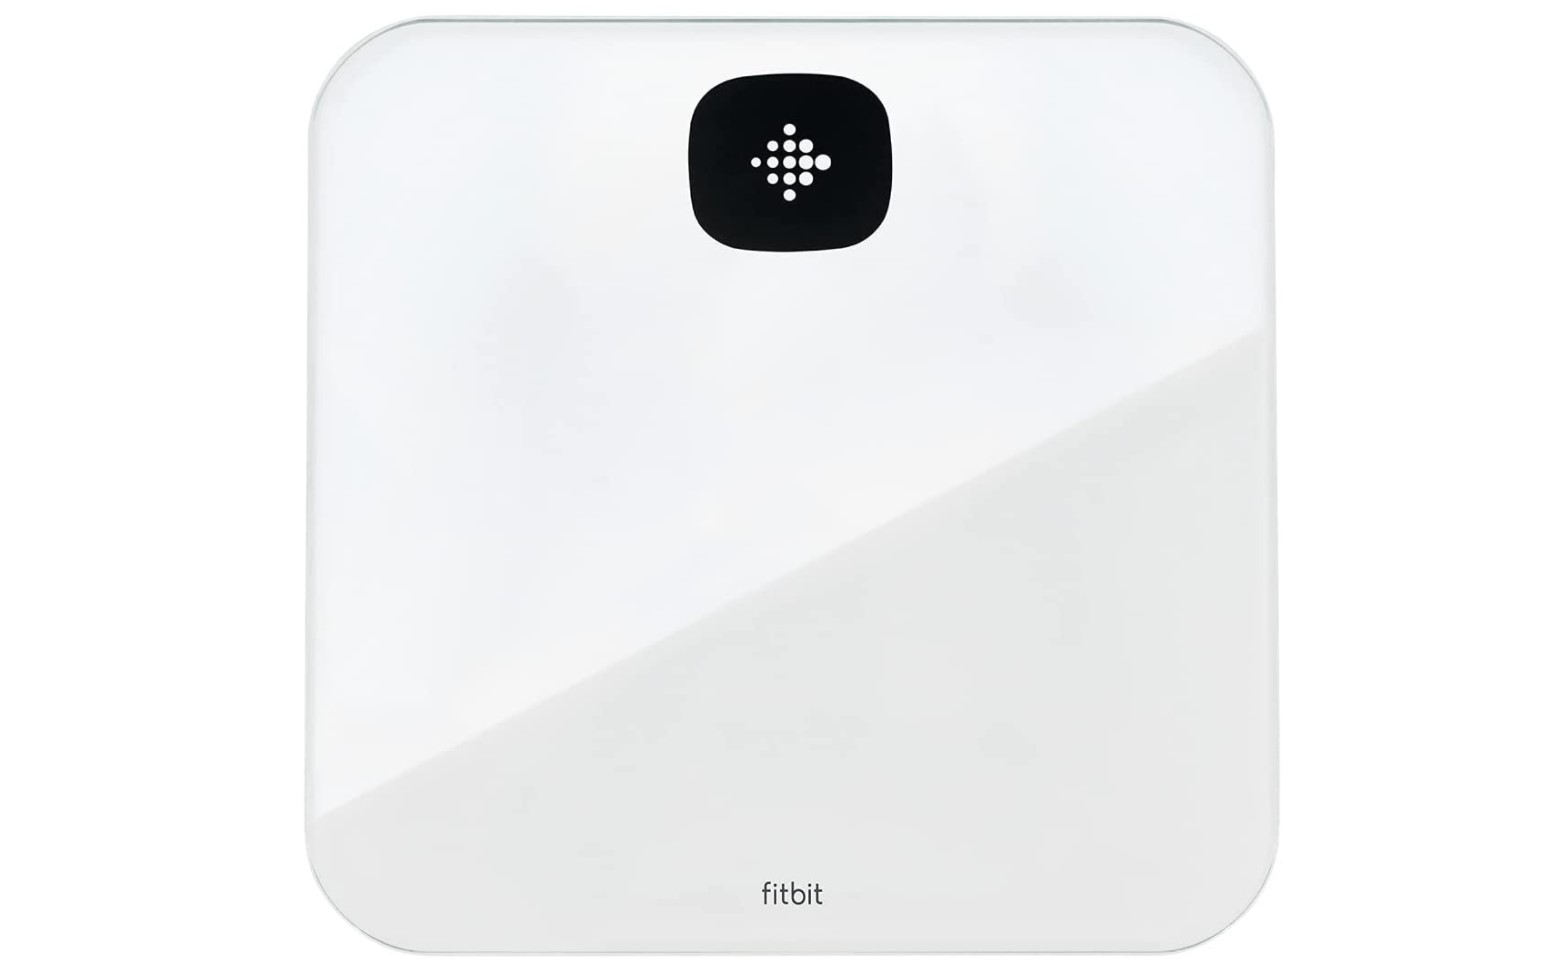 Fitbit Aria Air Smart Scale goes on sale for first time in nearly